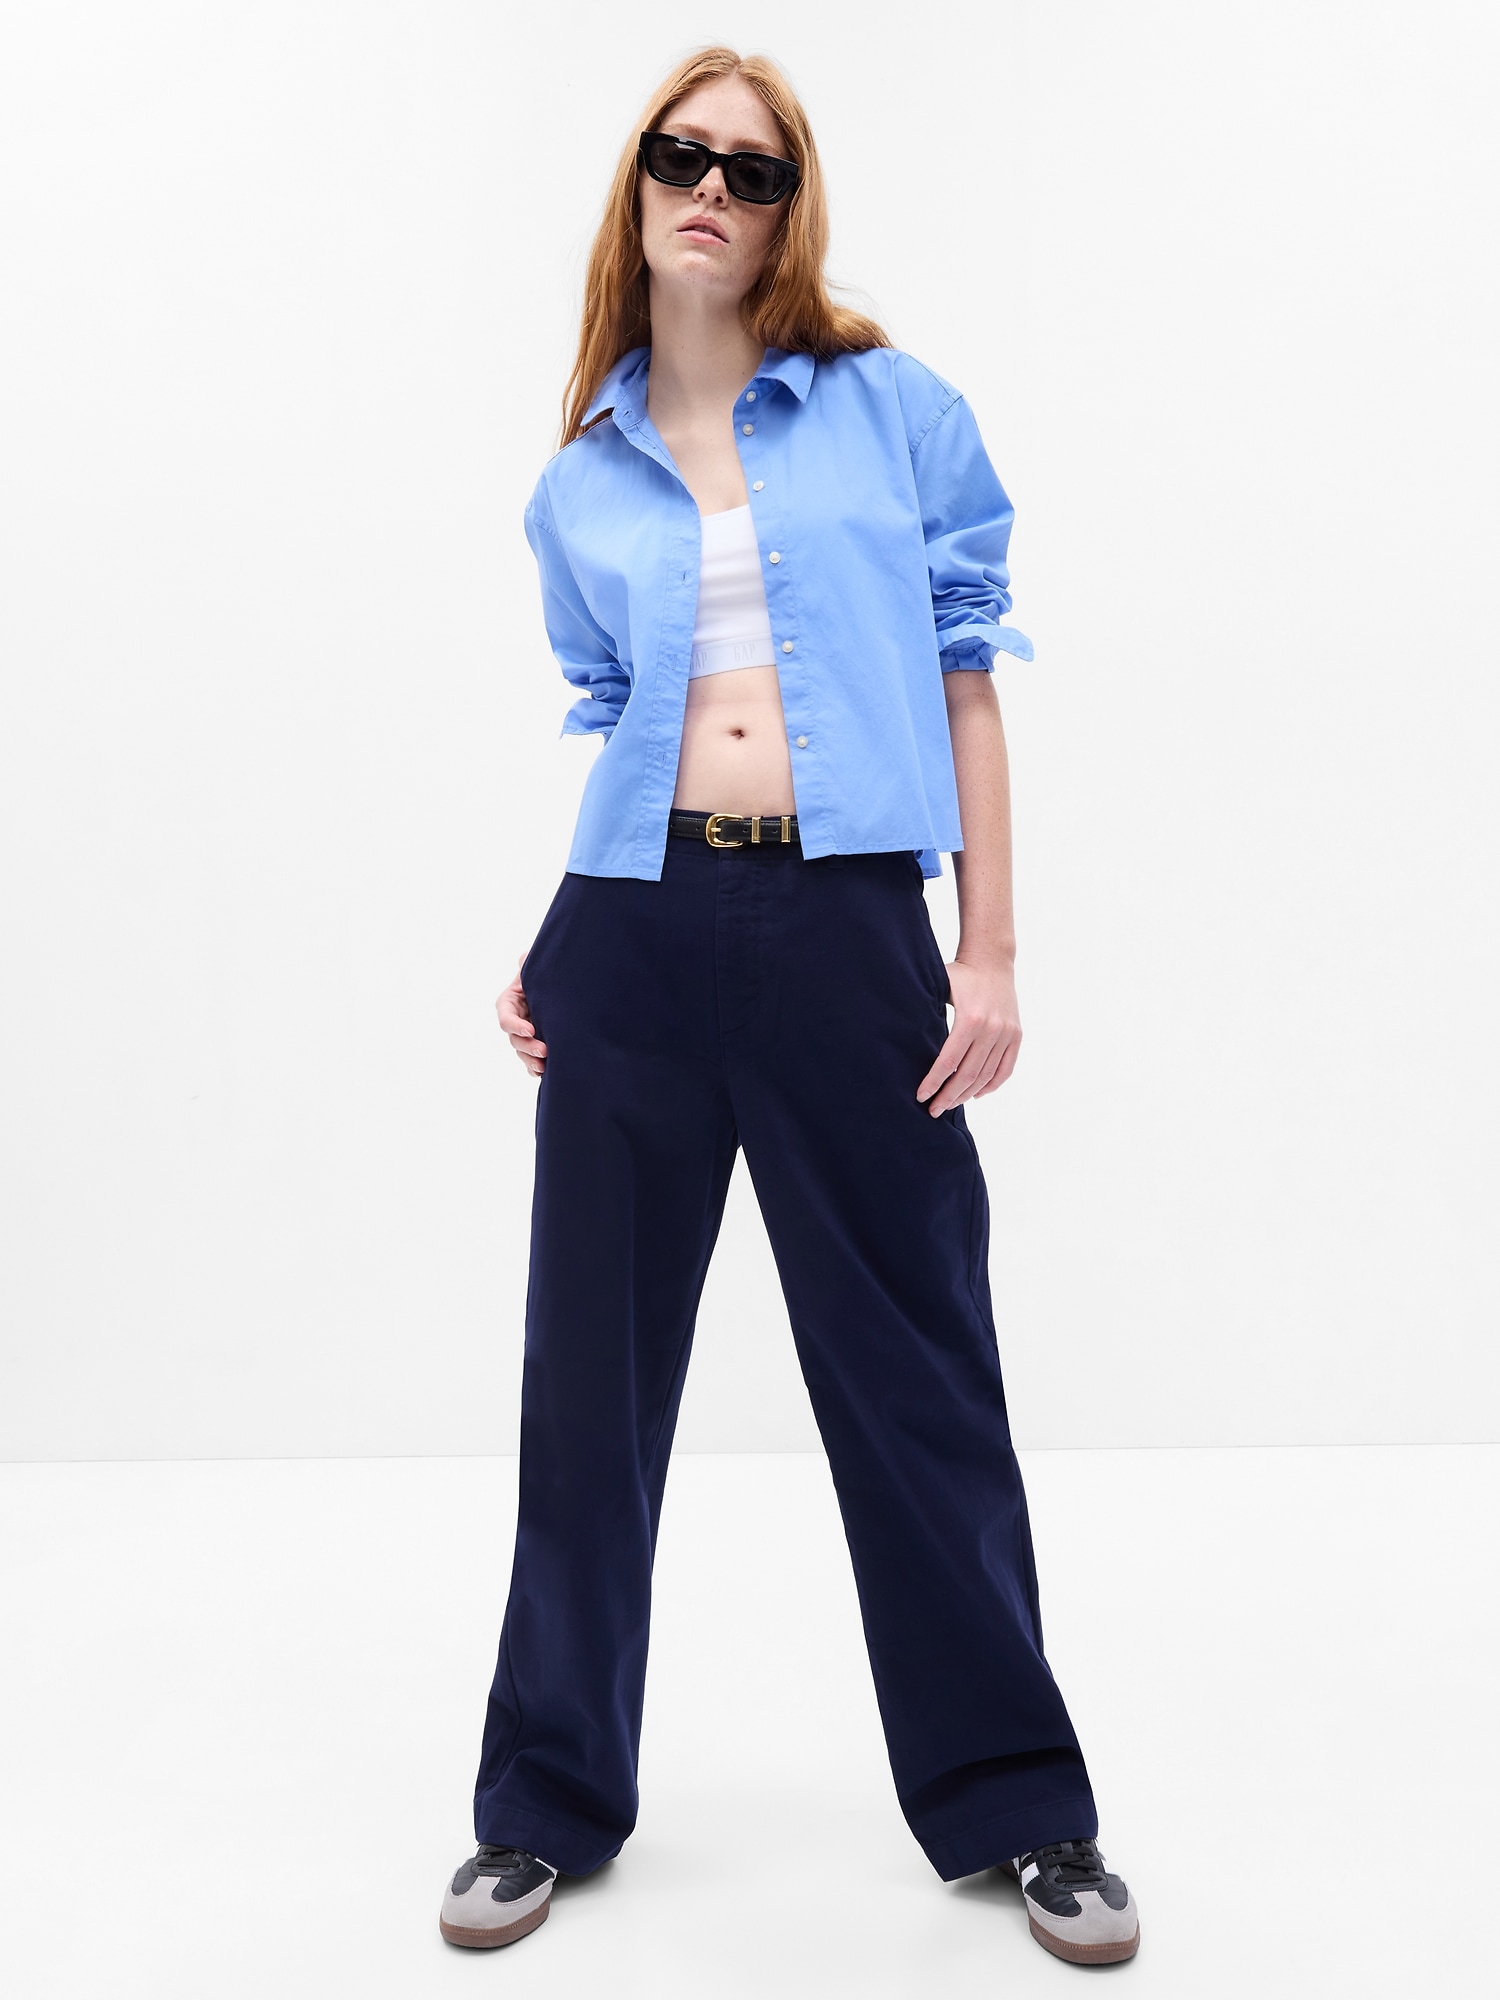 Blue Formal Trouser for Women – The Ambition Collective